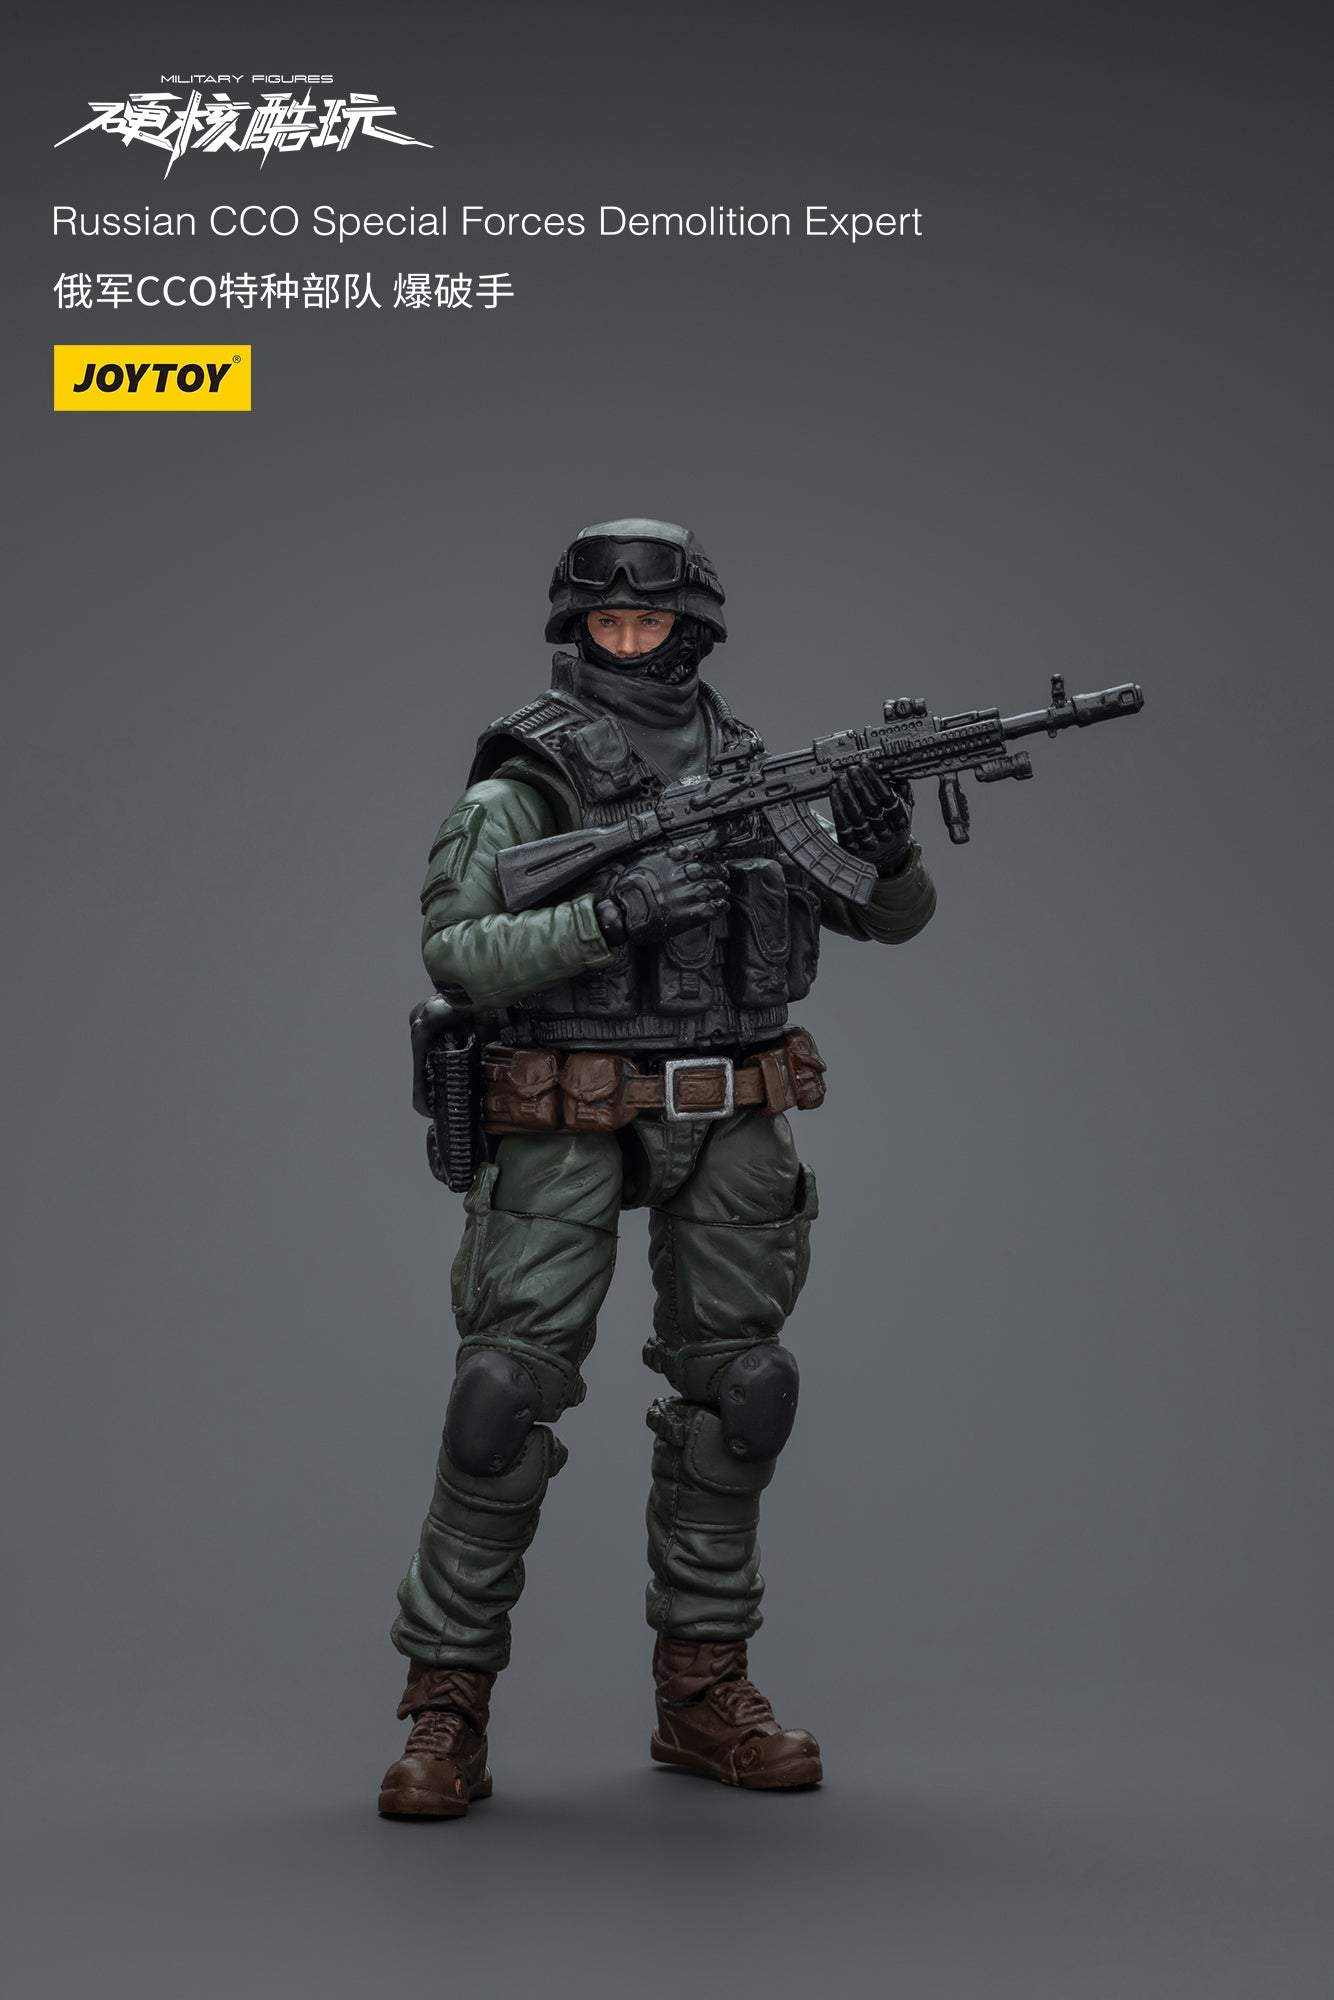 Russian CCO Special Forces Riot Squad - Hardcore Coldplay By JOYTOY